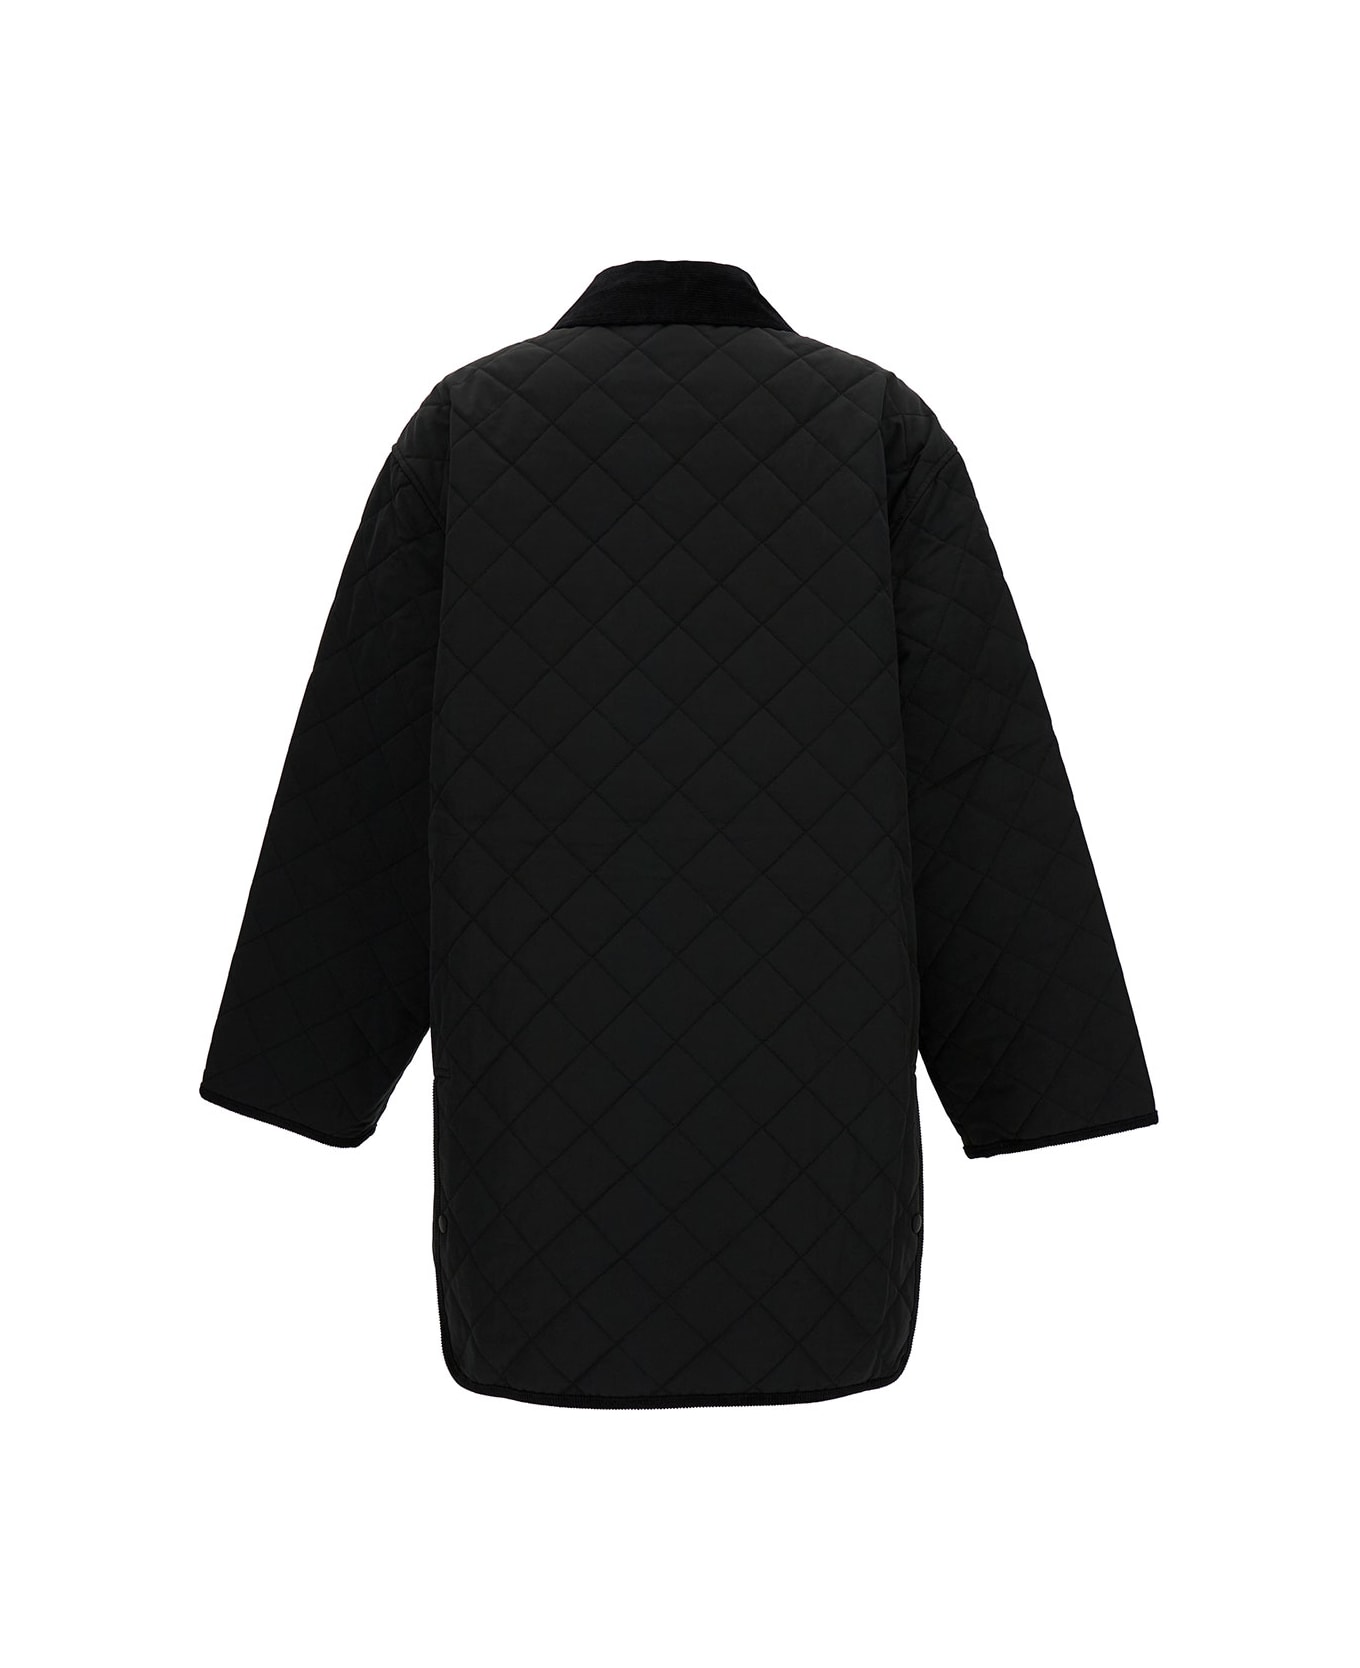 Totême Black Jacket With Collar And Oversized Pockets In Quilted Fabric Woman - Black